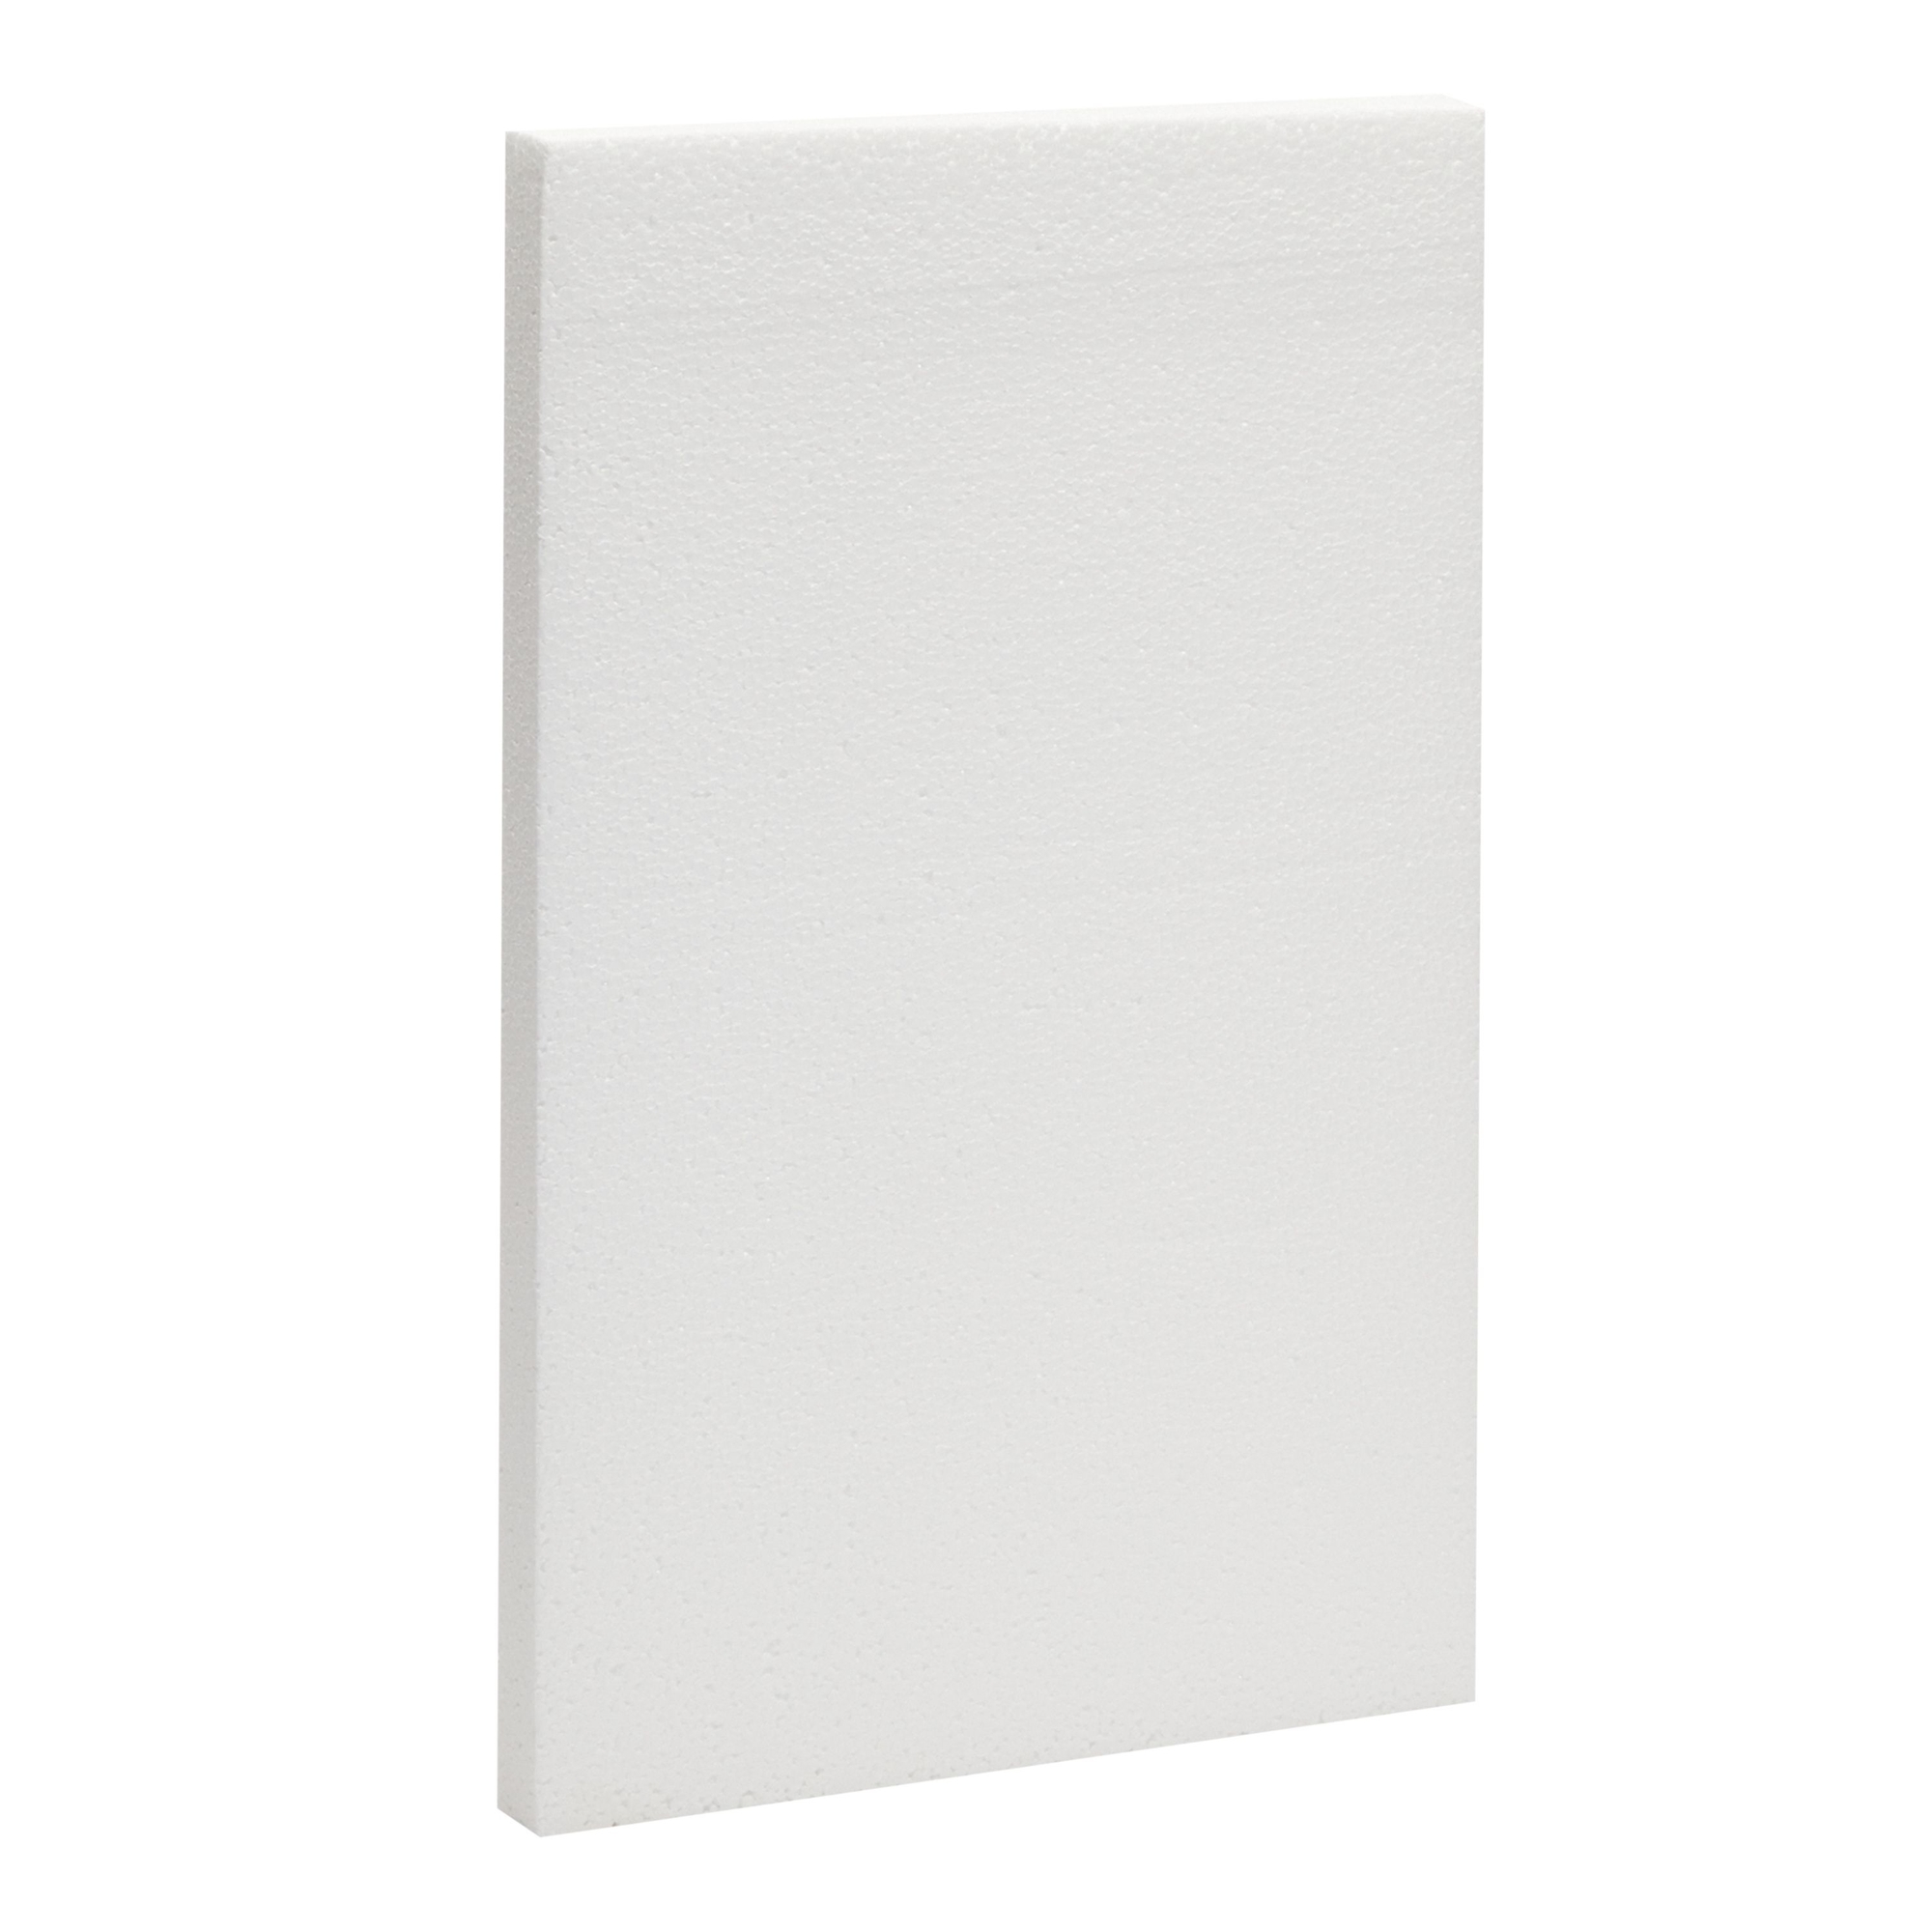 1 Inch Thick Foam Board Sheets - 6 Pack 17x11 Inch Polystyrene